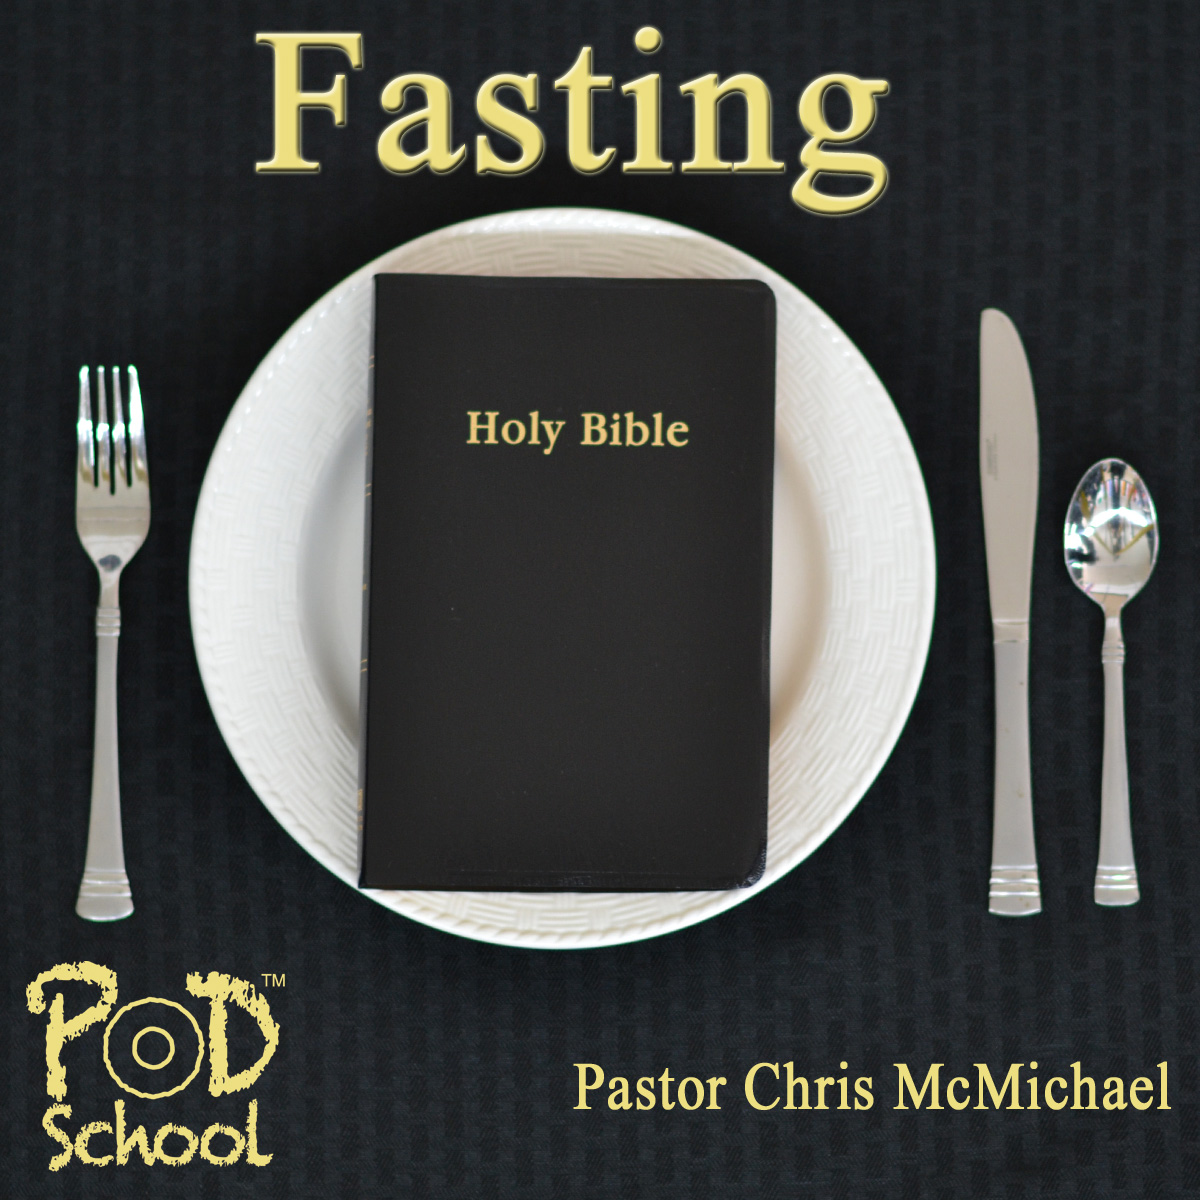 Fasting fast 21 fun tips never been has intermittent think peter haas if